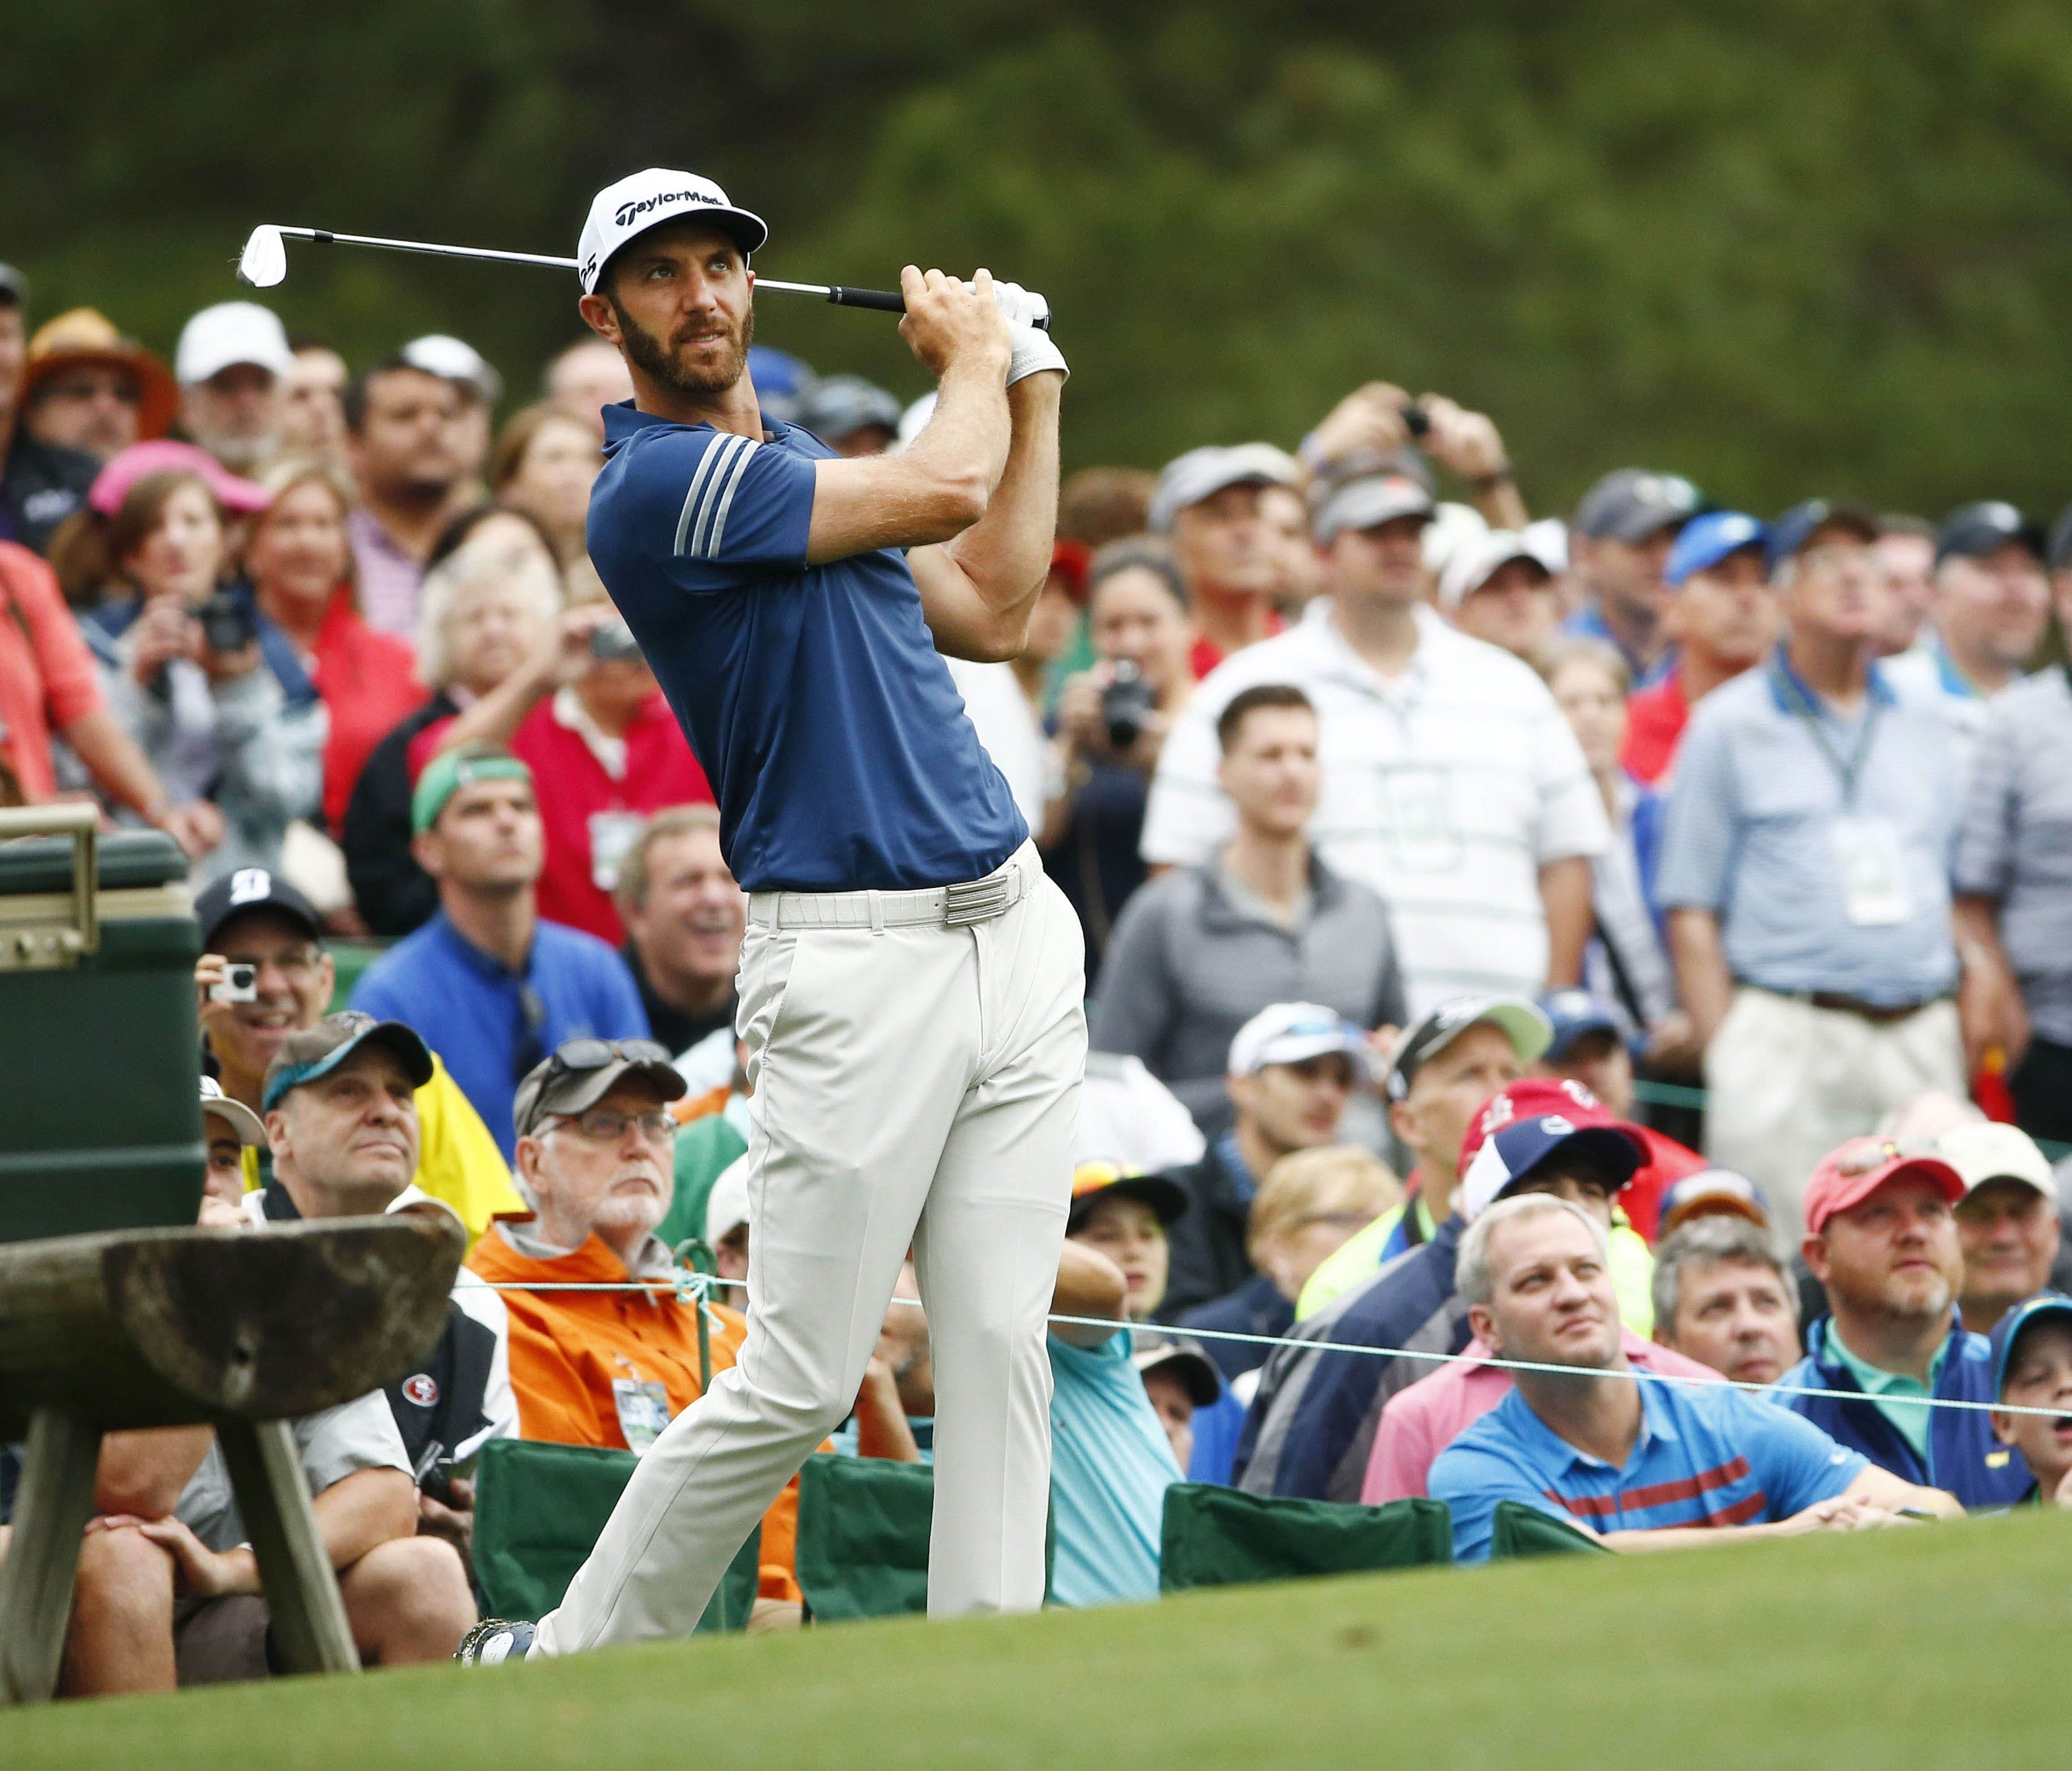 Dustin Johnson hits his tee shot on the 12th hole during a practice round at the Masters on April 4.